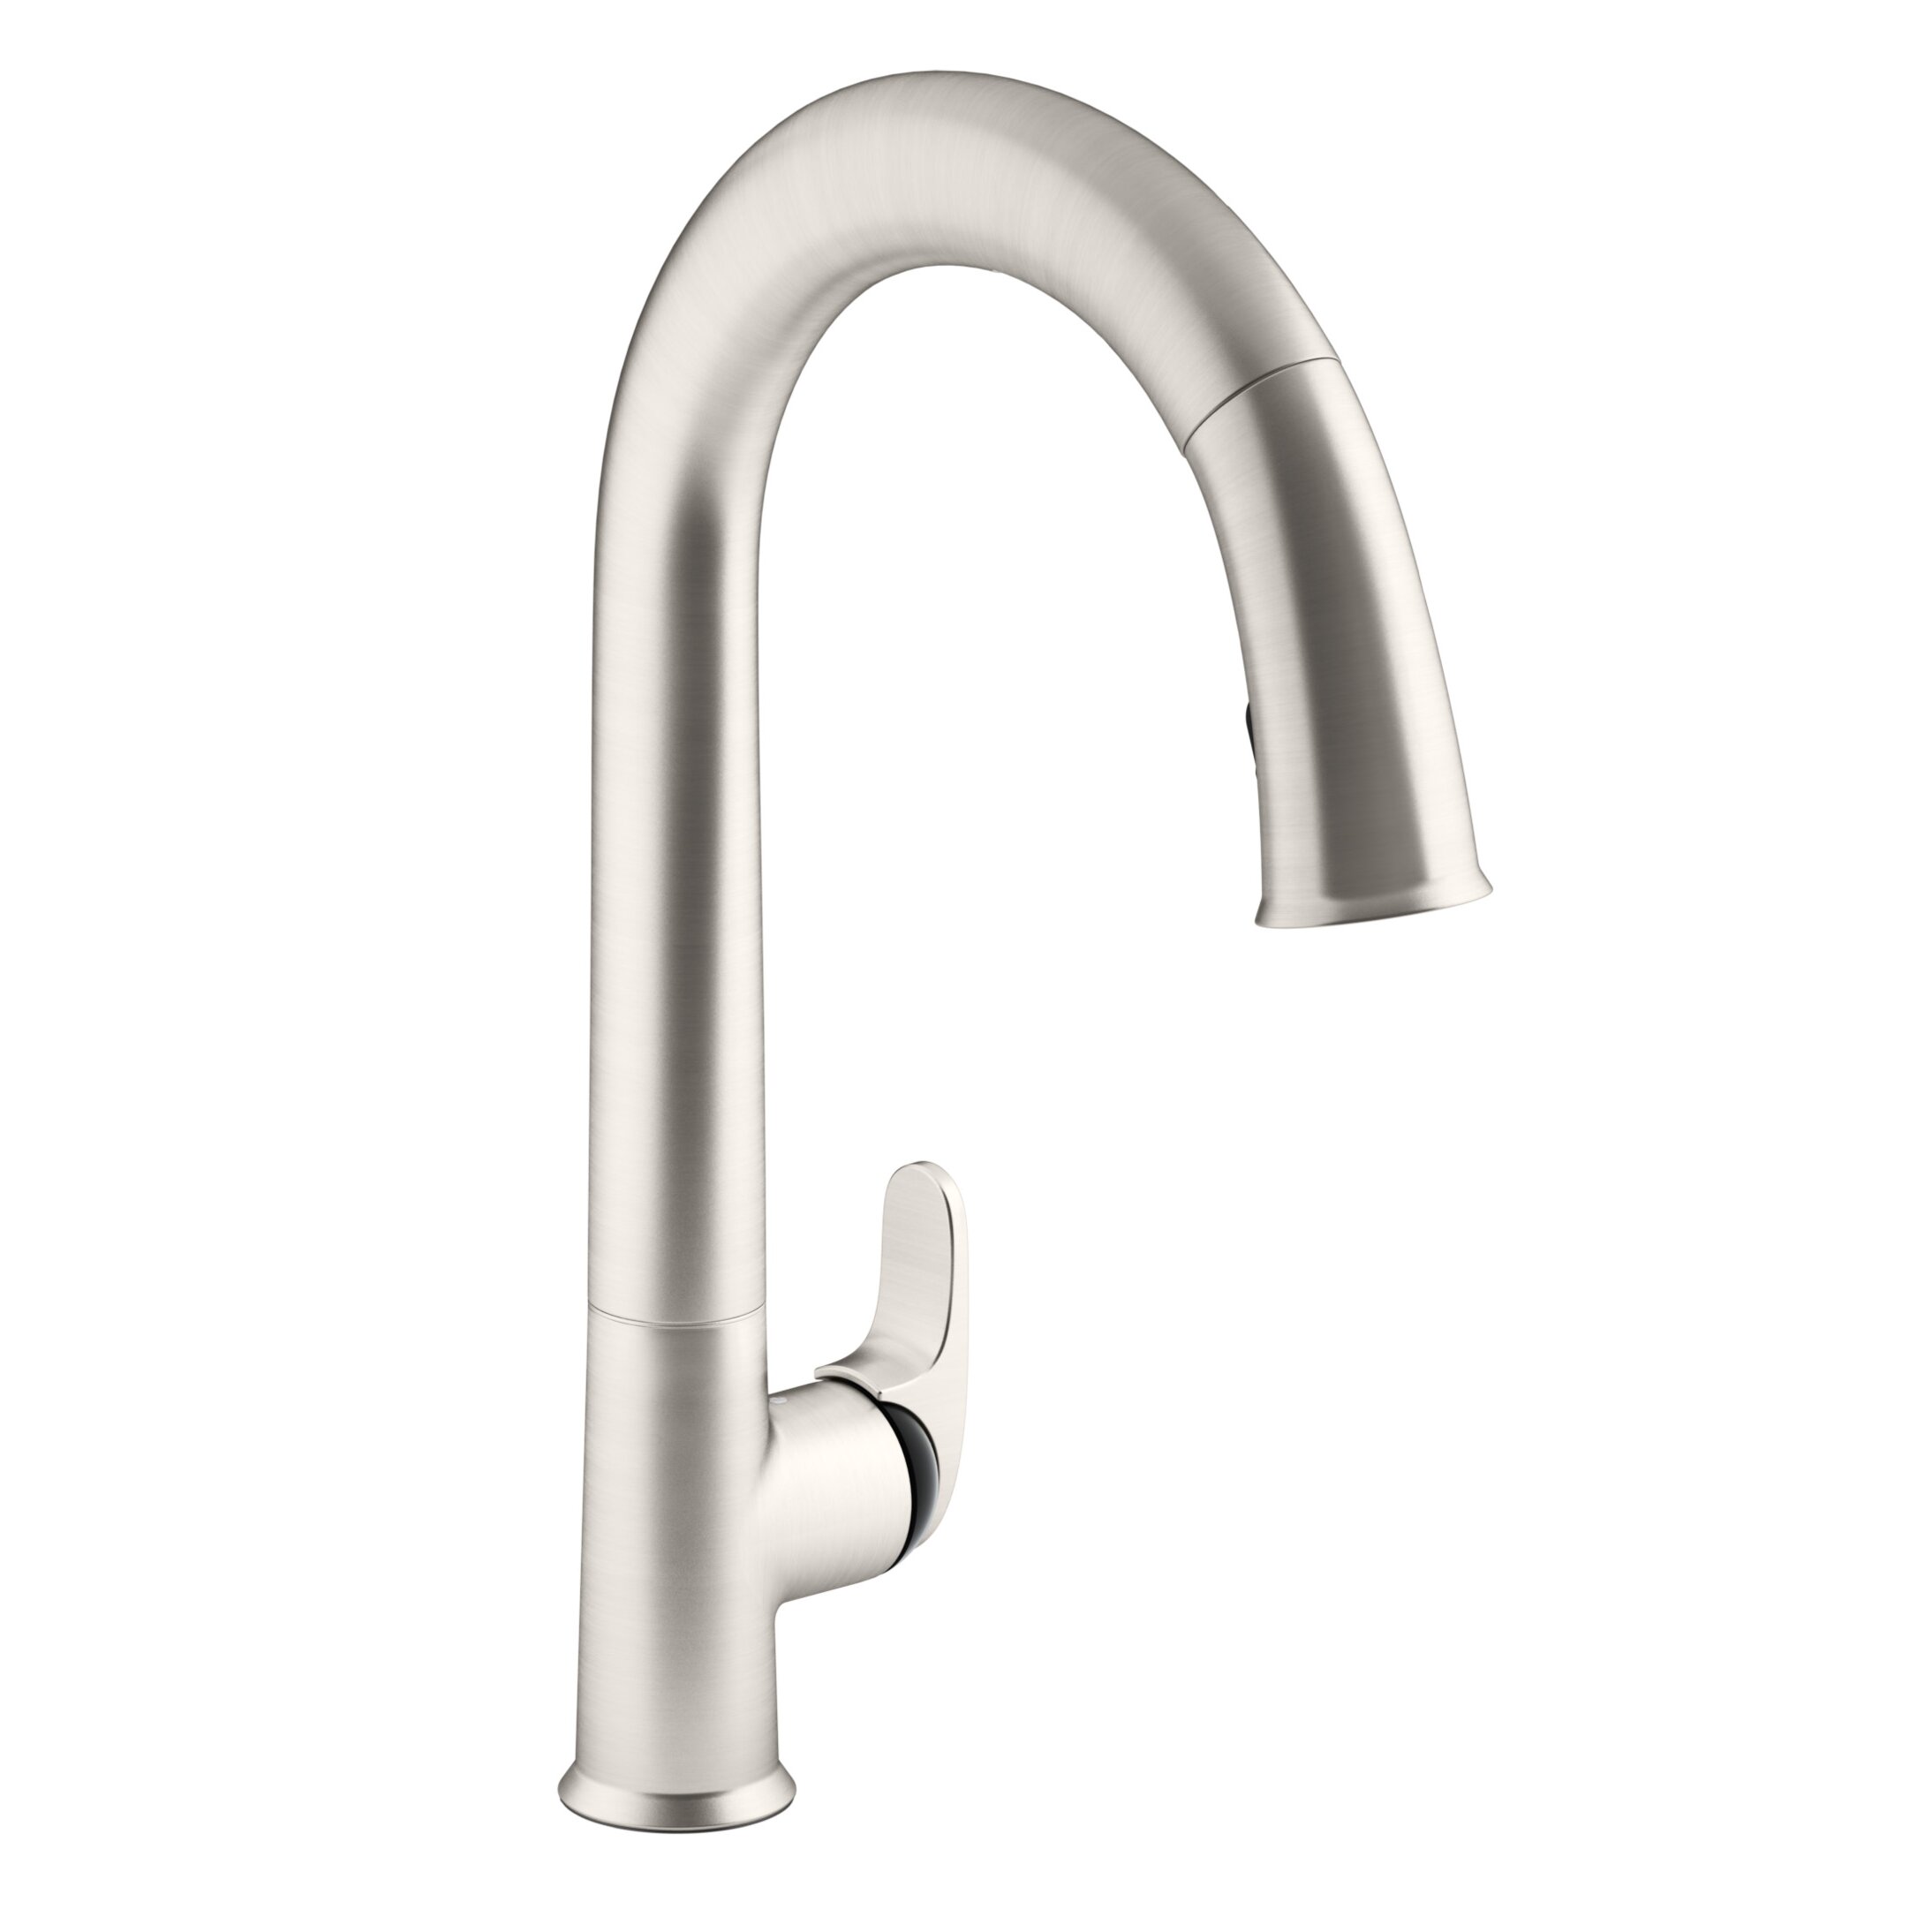 Rohl Bathroom Faucets Yelp Reviews